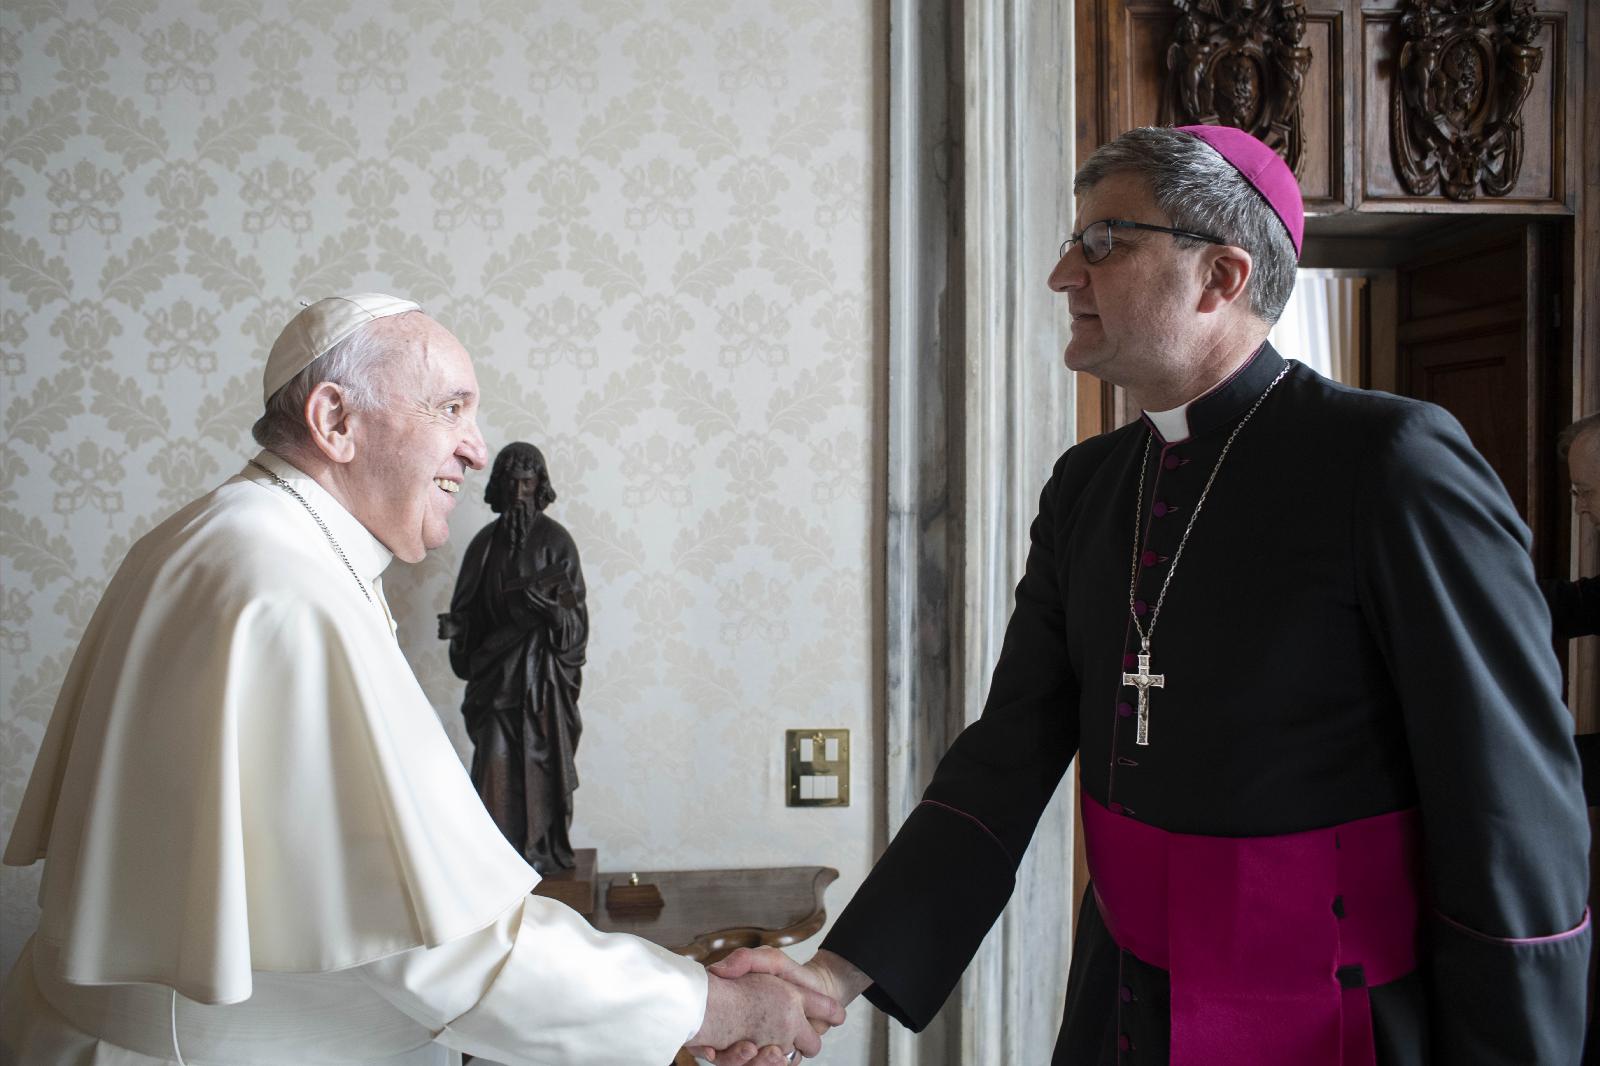 French bishops send two synodality reports to Rome